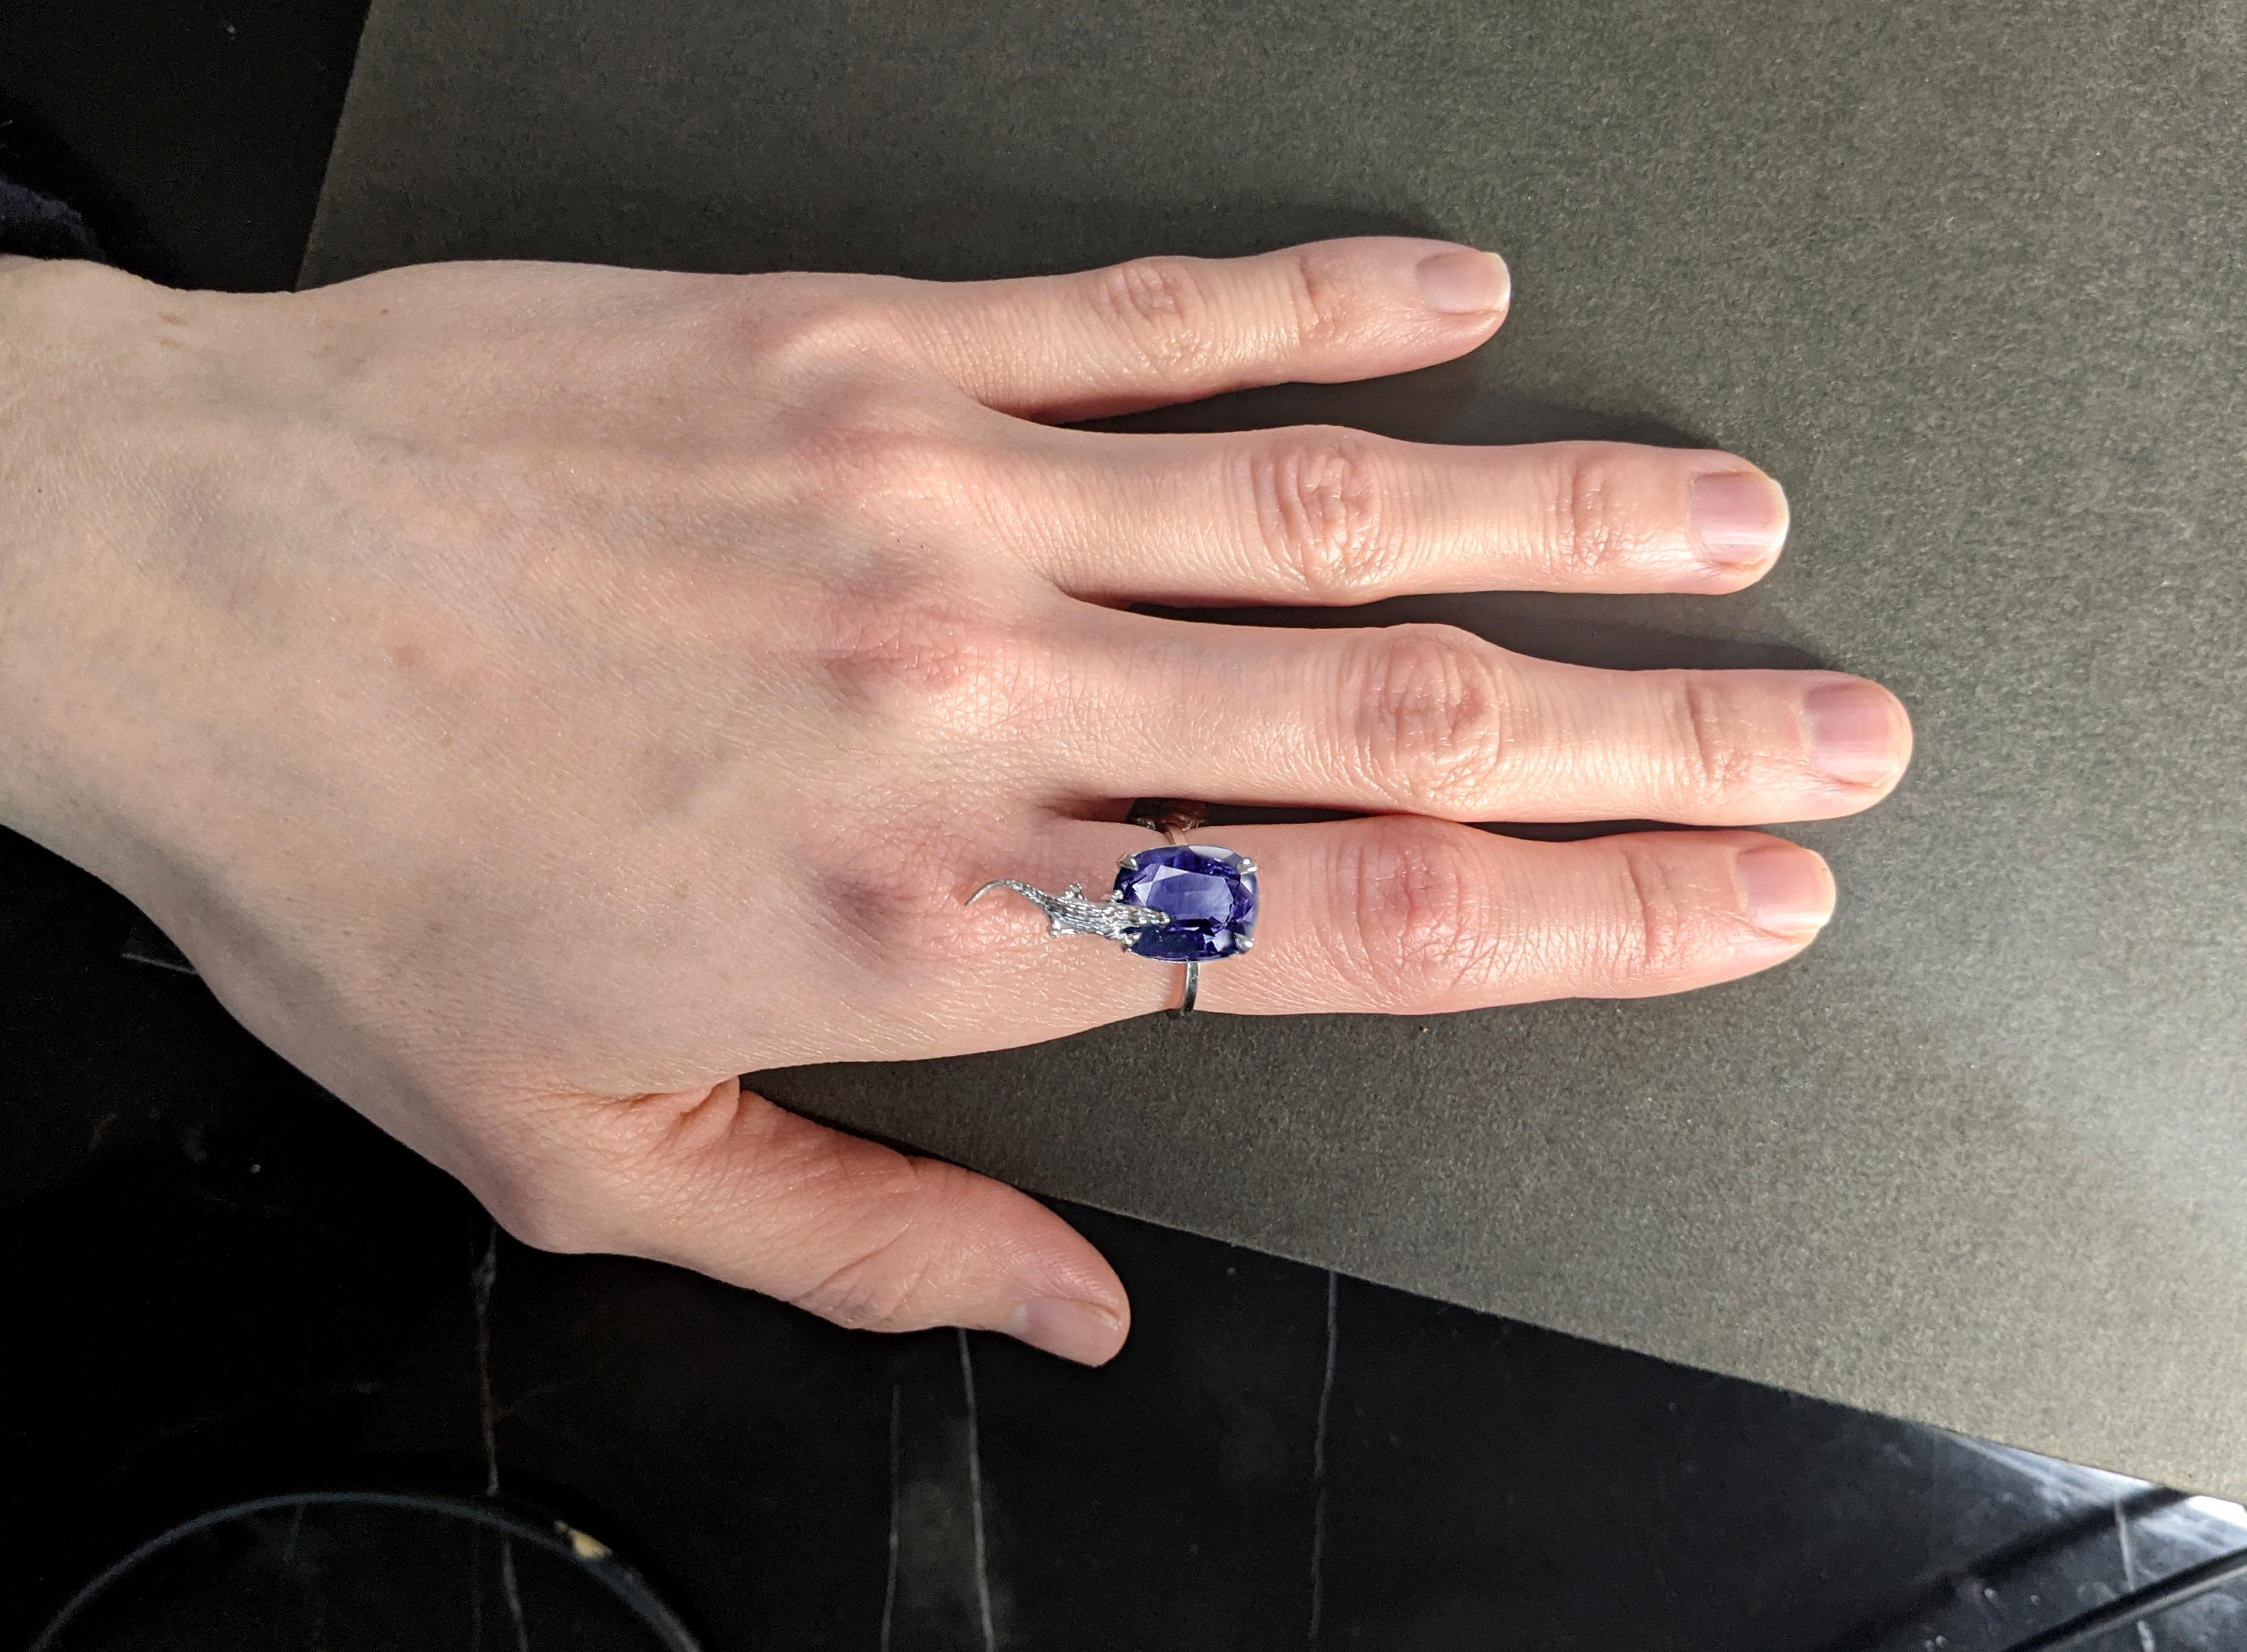 This 18 karat white gold contemporary Mesopotamian ring is encrusted with GIL certified 7.96 carats natural unheated vivid cornflower blue cushion sapphire, 11.16x8.71 mm. The gem catches eye's attention and well designed in contemporary design